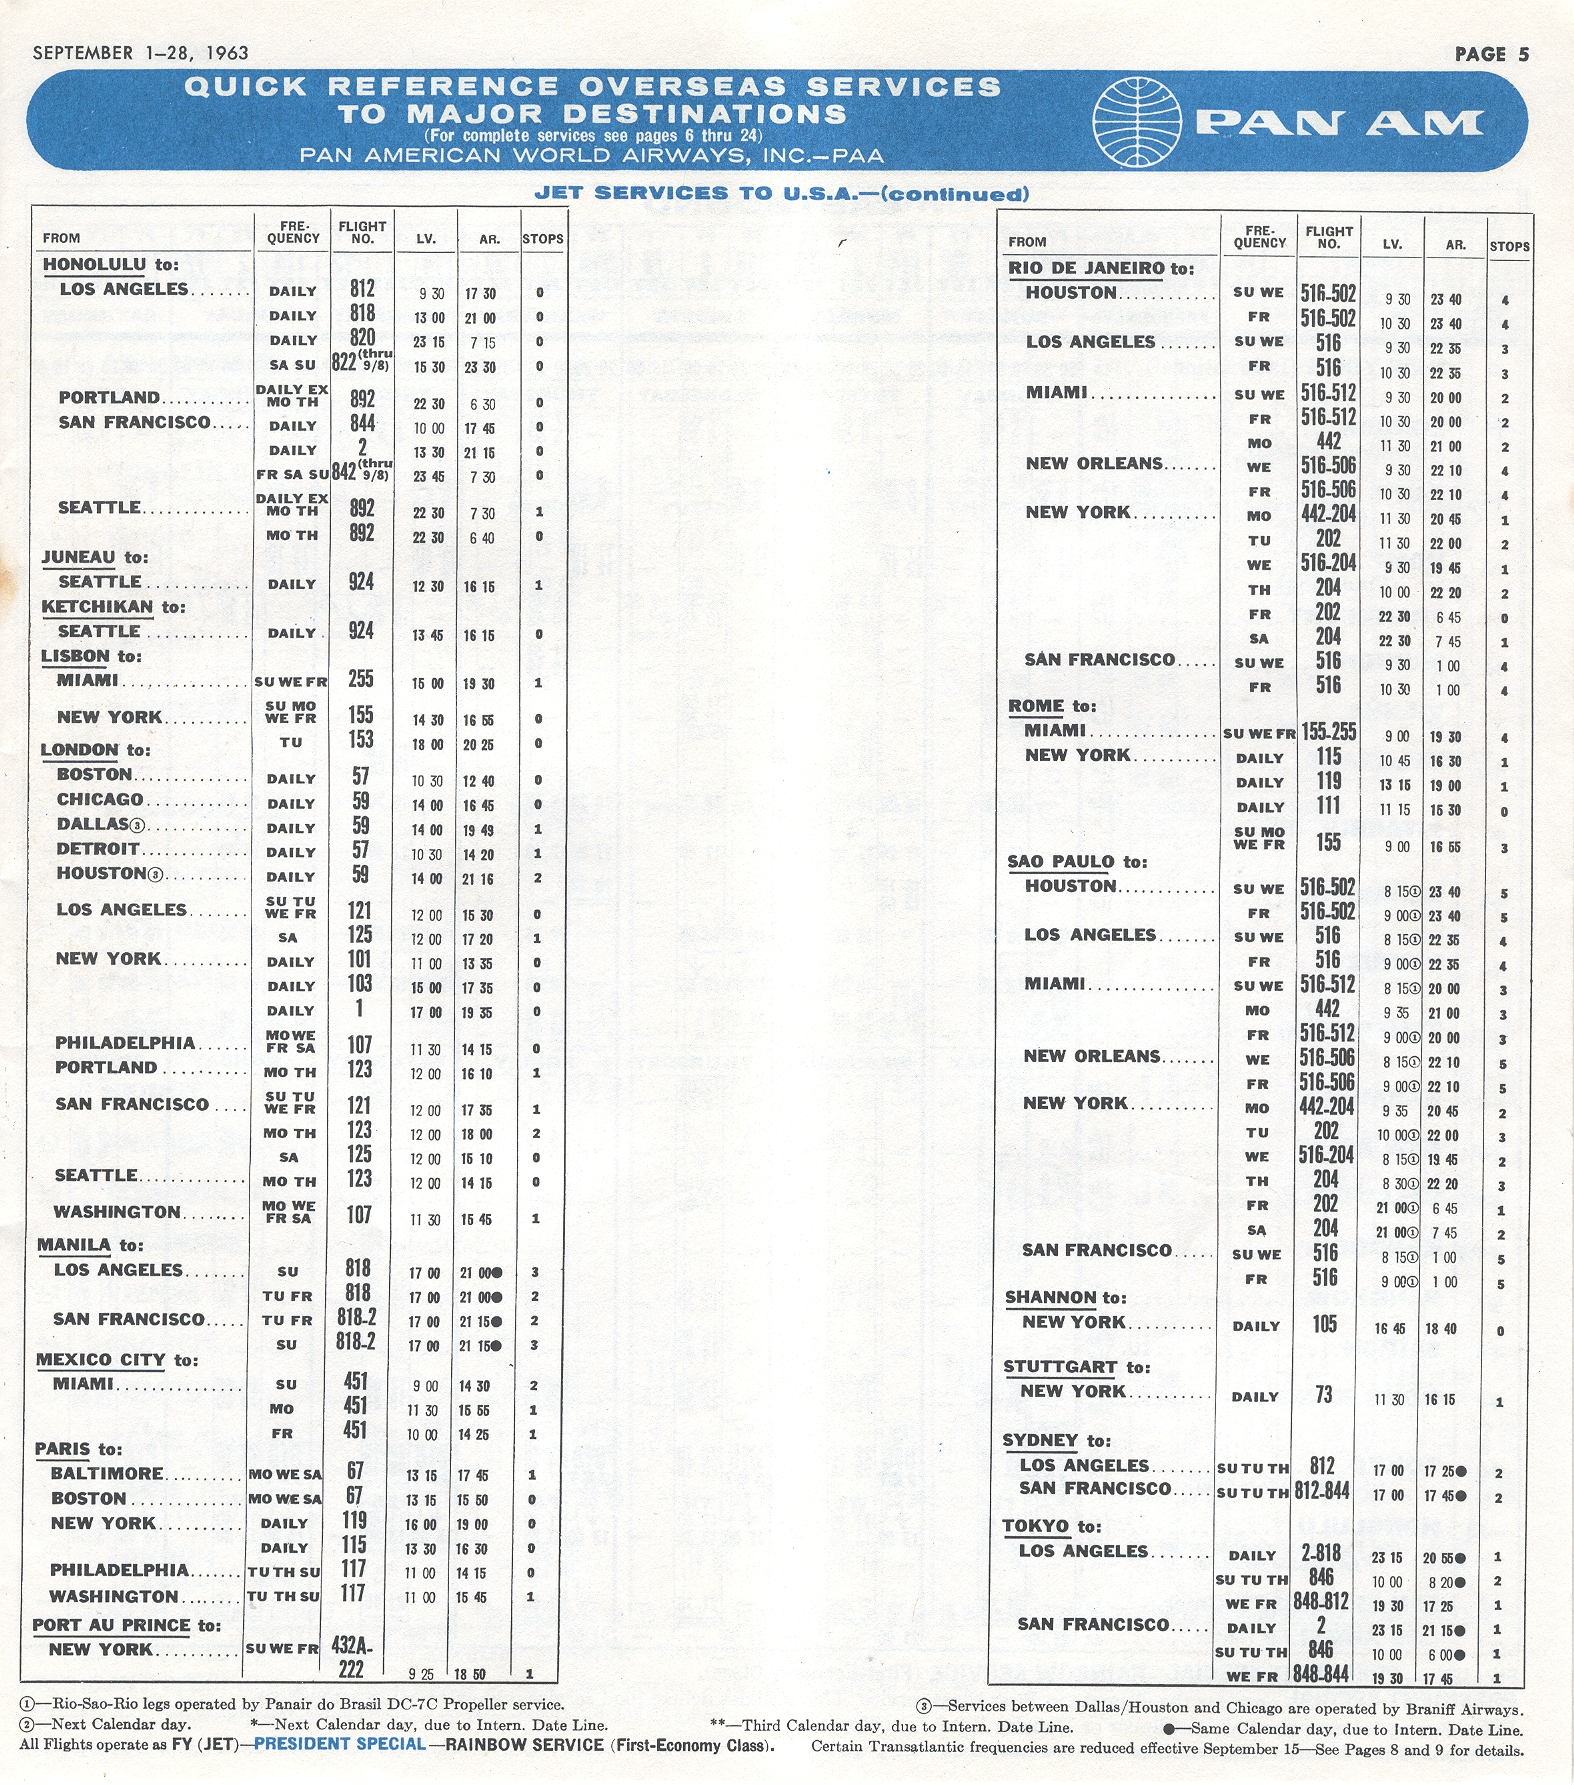 1963, September 1-30  Quick Reference Schedule page 3.